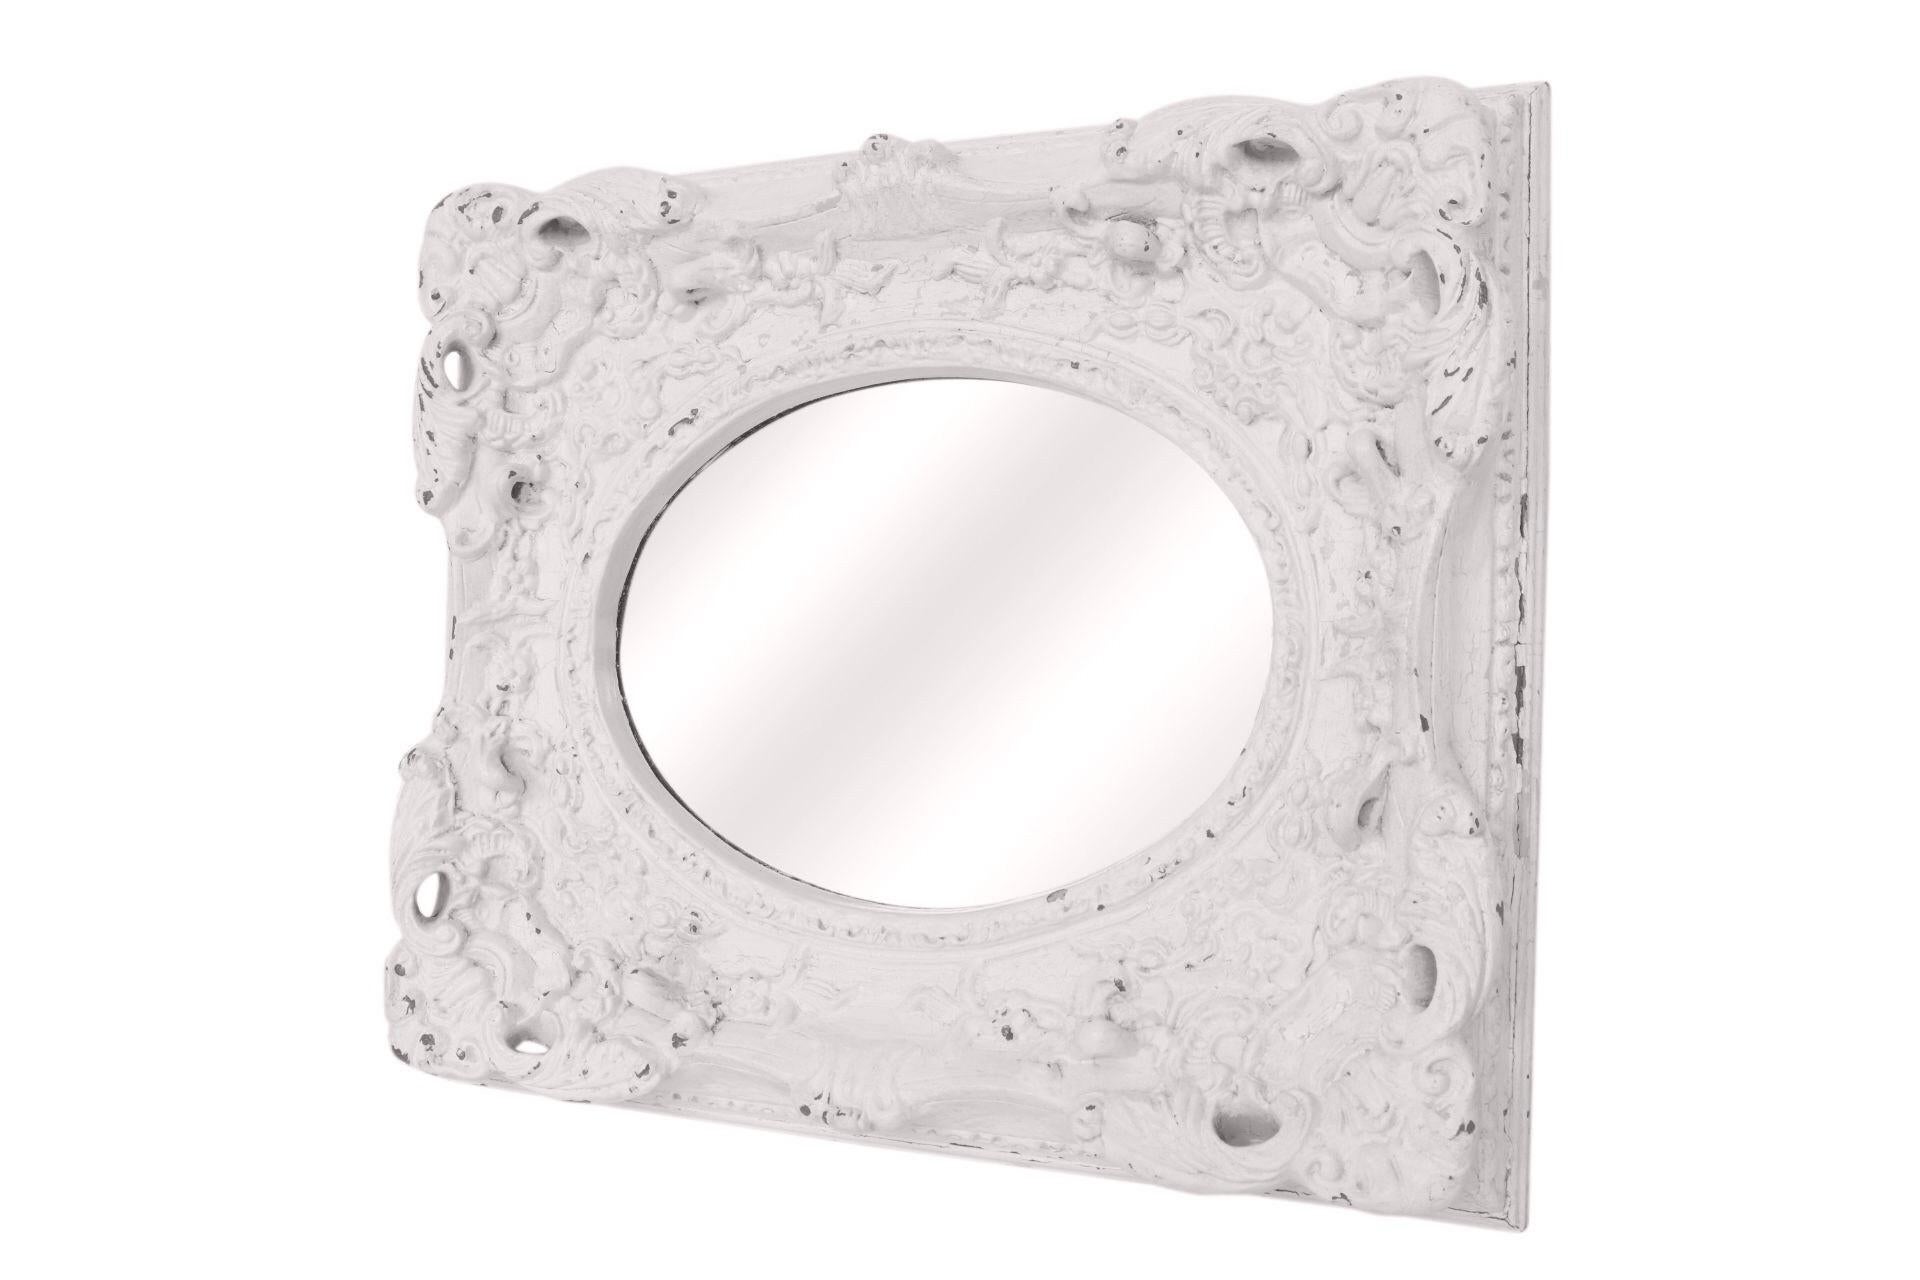 An oval mirror set in a thick, ornately carved, rococo frame painted white. Wired and ready to hang.